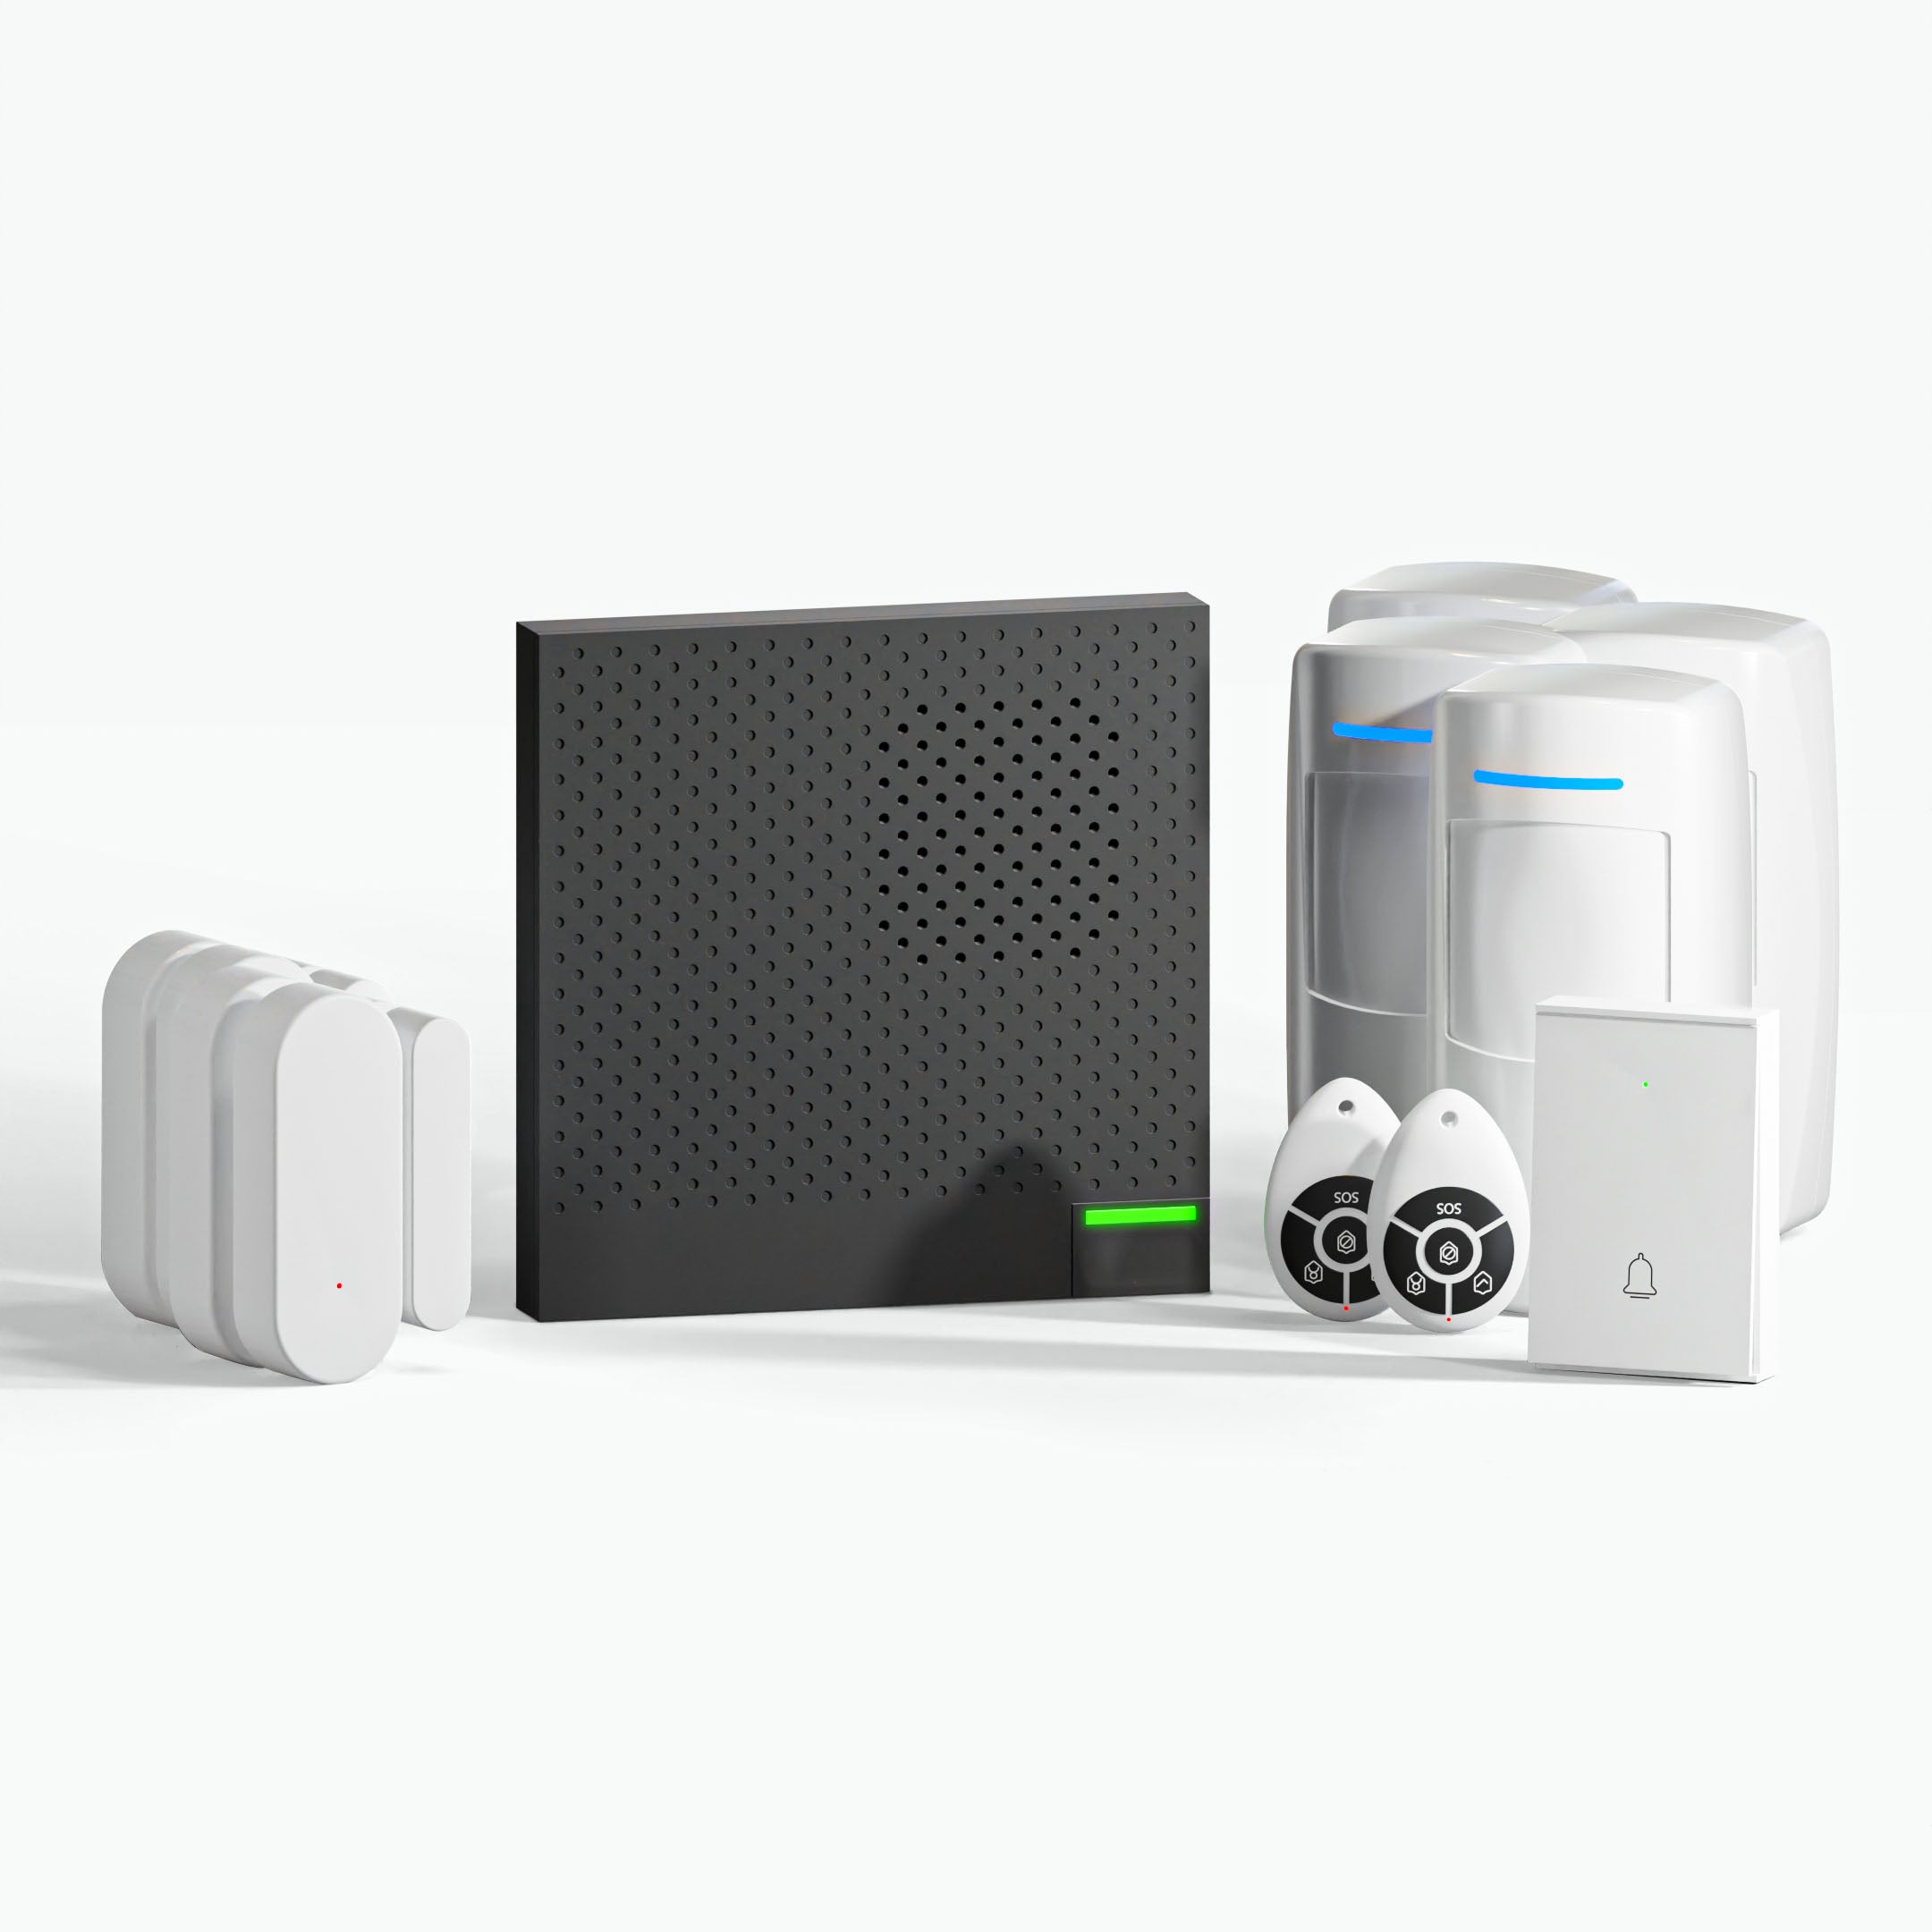 Staniot SecBox 3 smart security alarm system Advanced Combo selection on a white background